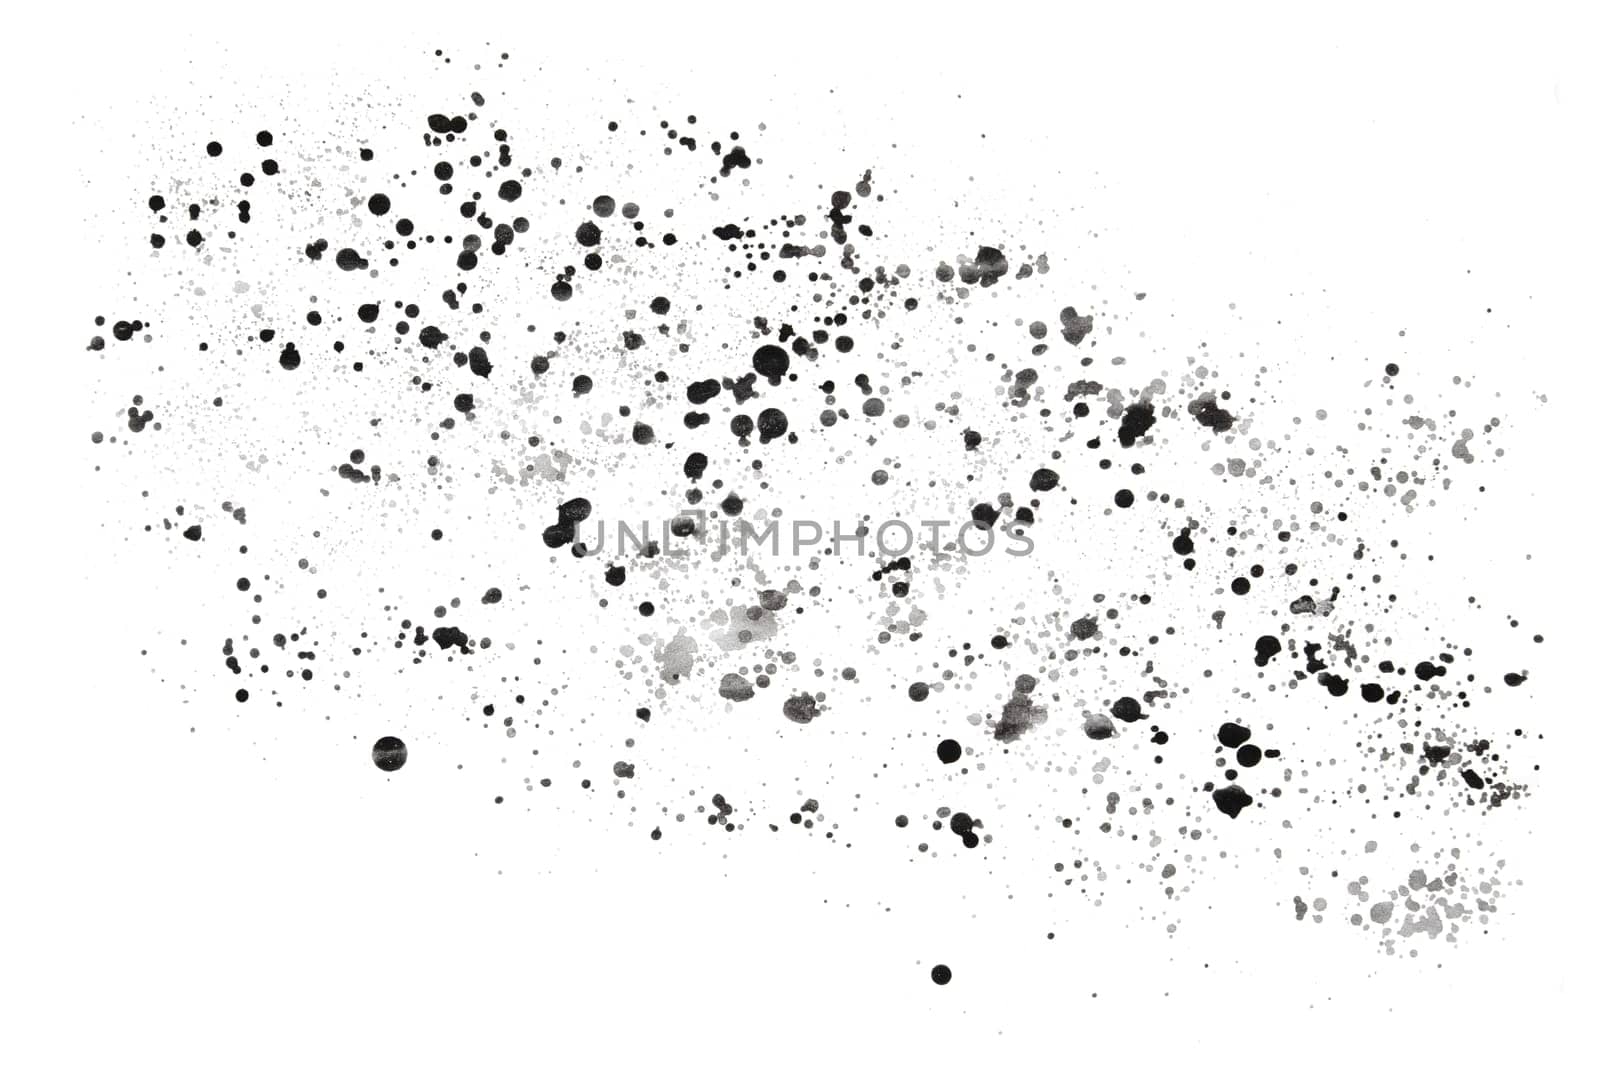 Splatter of black paint isolated on a white background. Stock photo by anna_artist